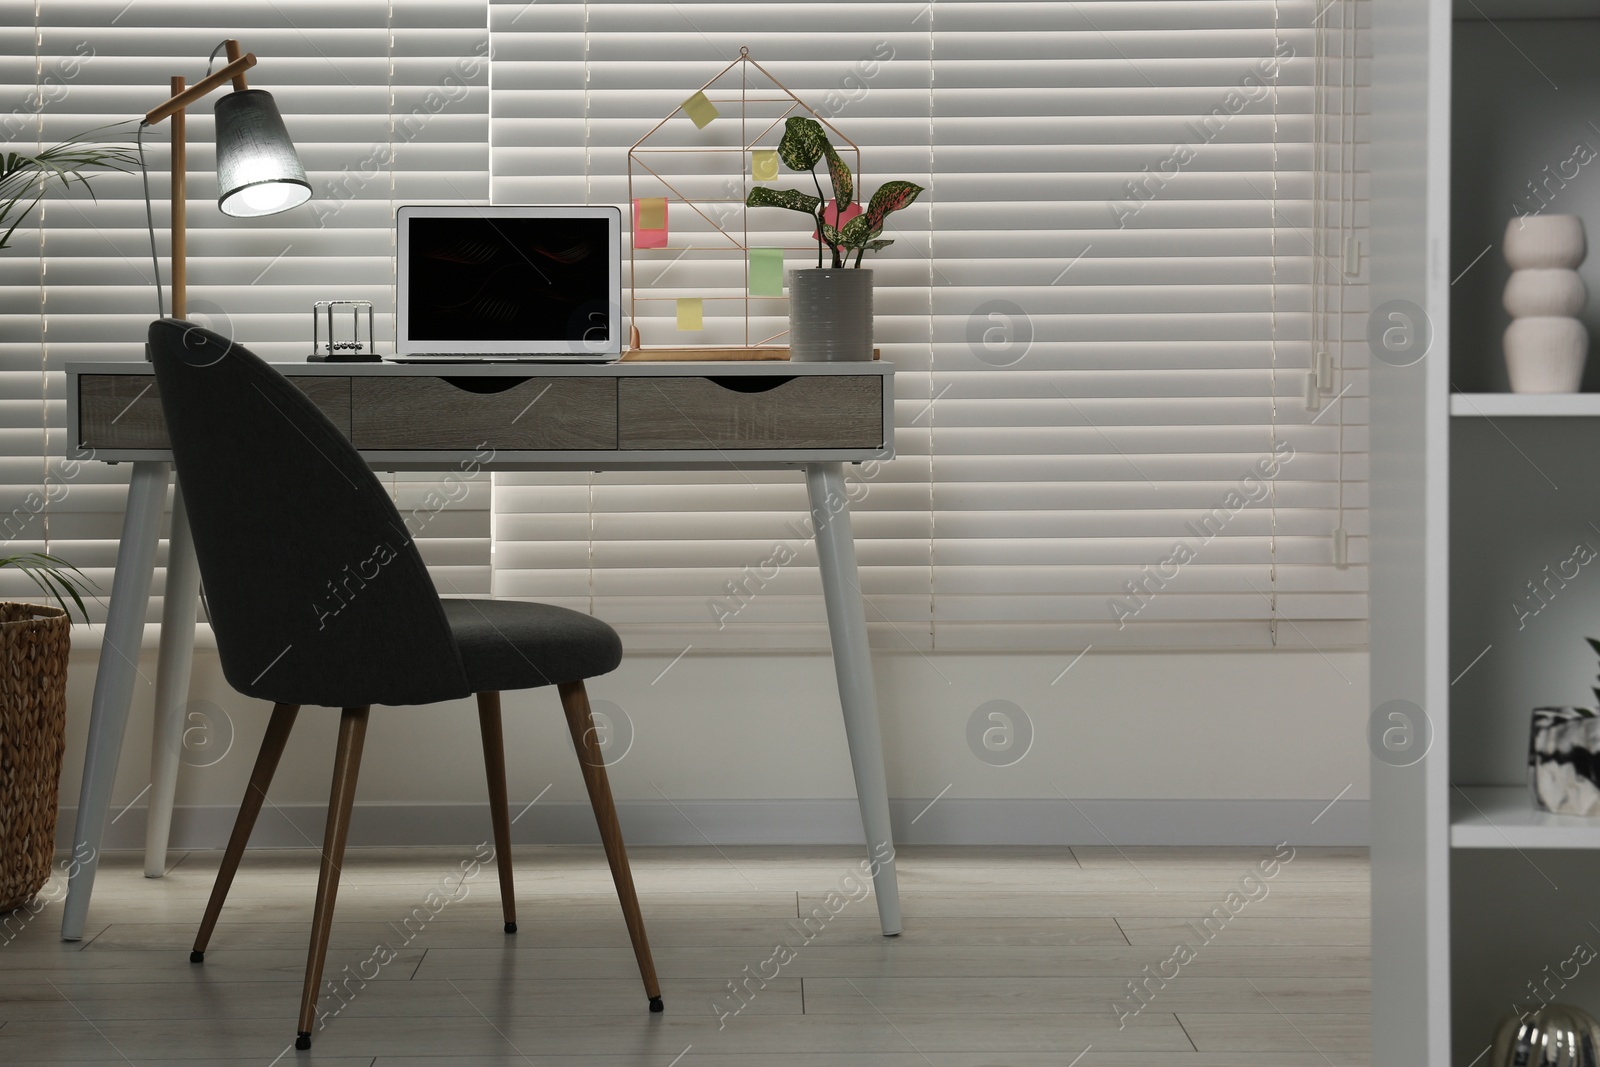 Photo of Cozy workspace with laptop, desk and comfortable chair at home. Stylish interior design